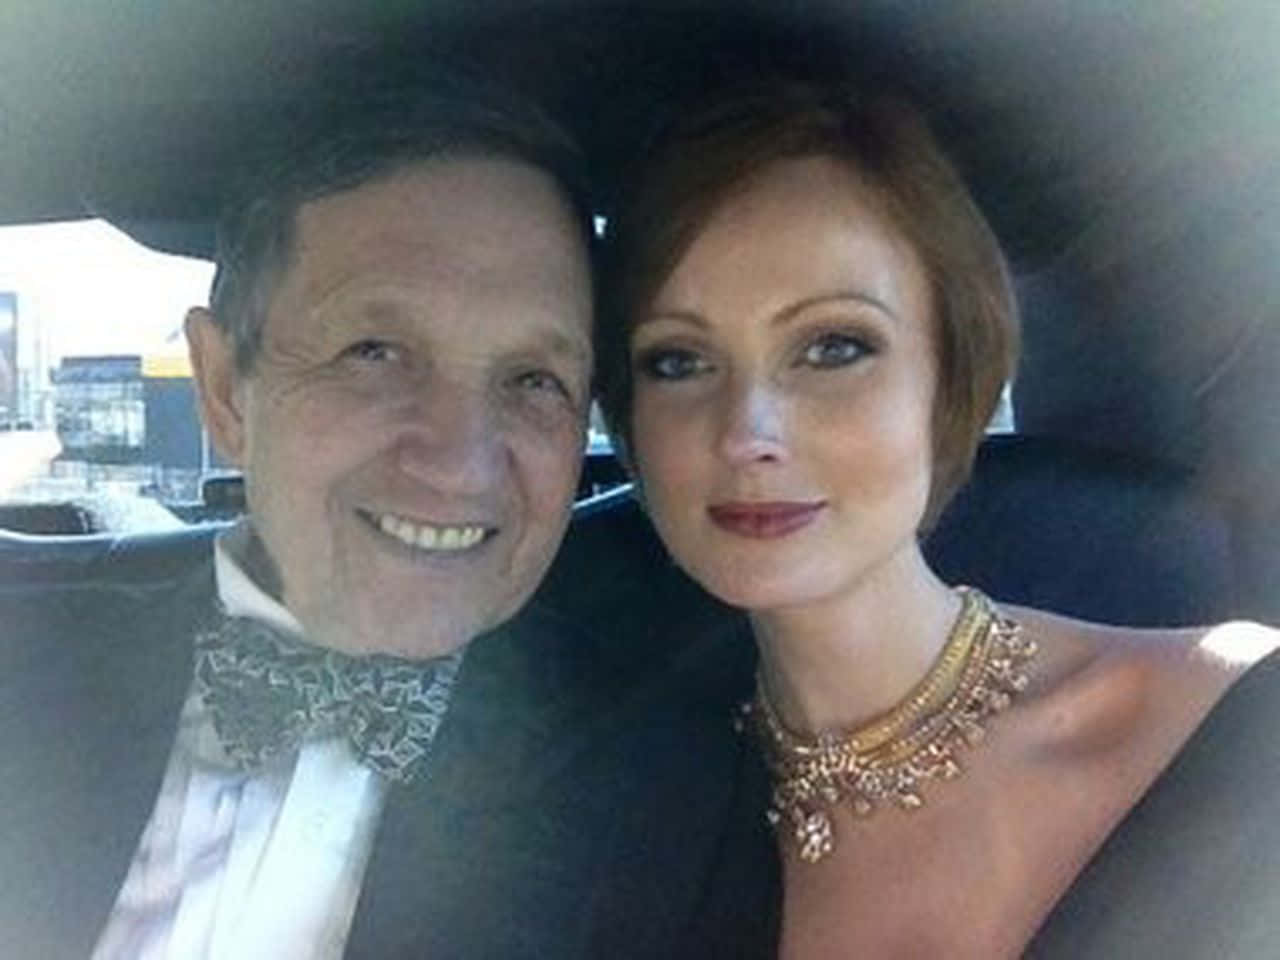 Image Inside The Car Of Dennis Kucinich And His Wife Wallpaper